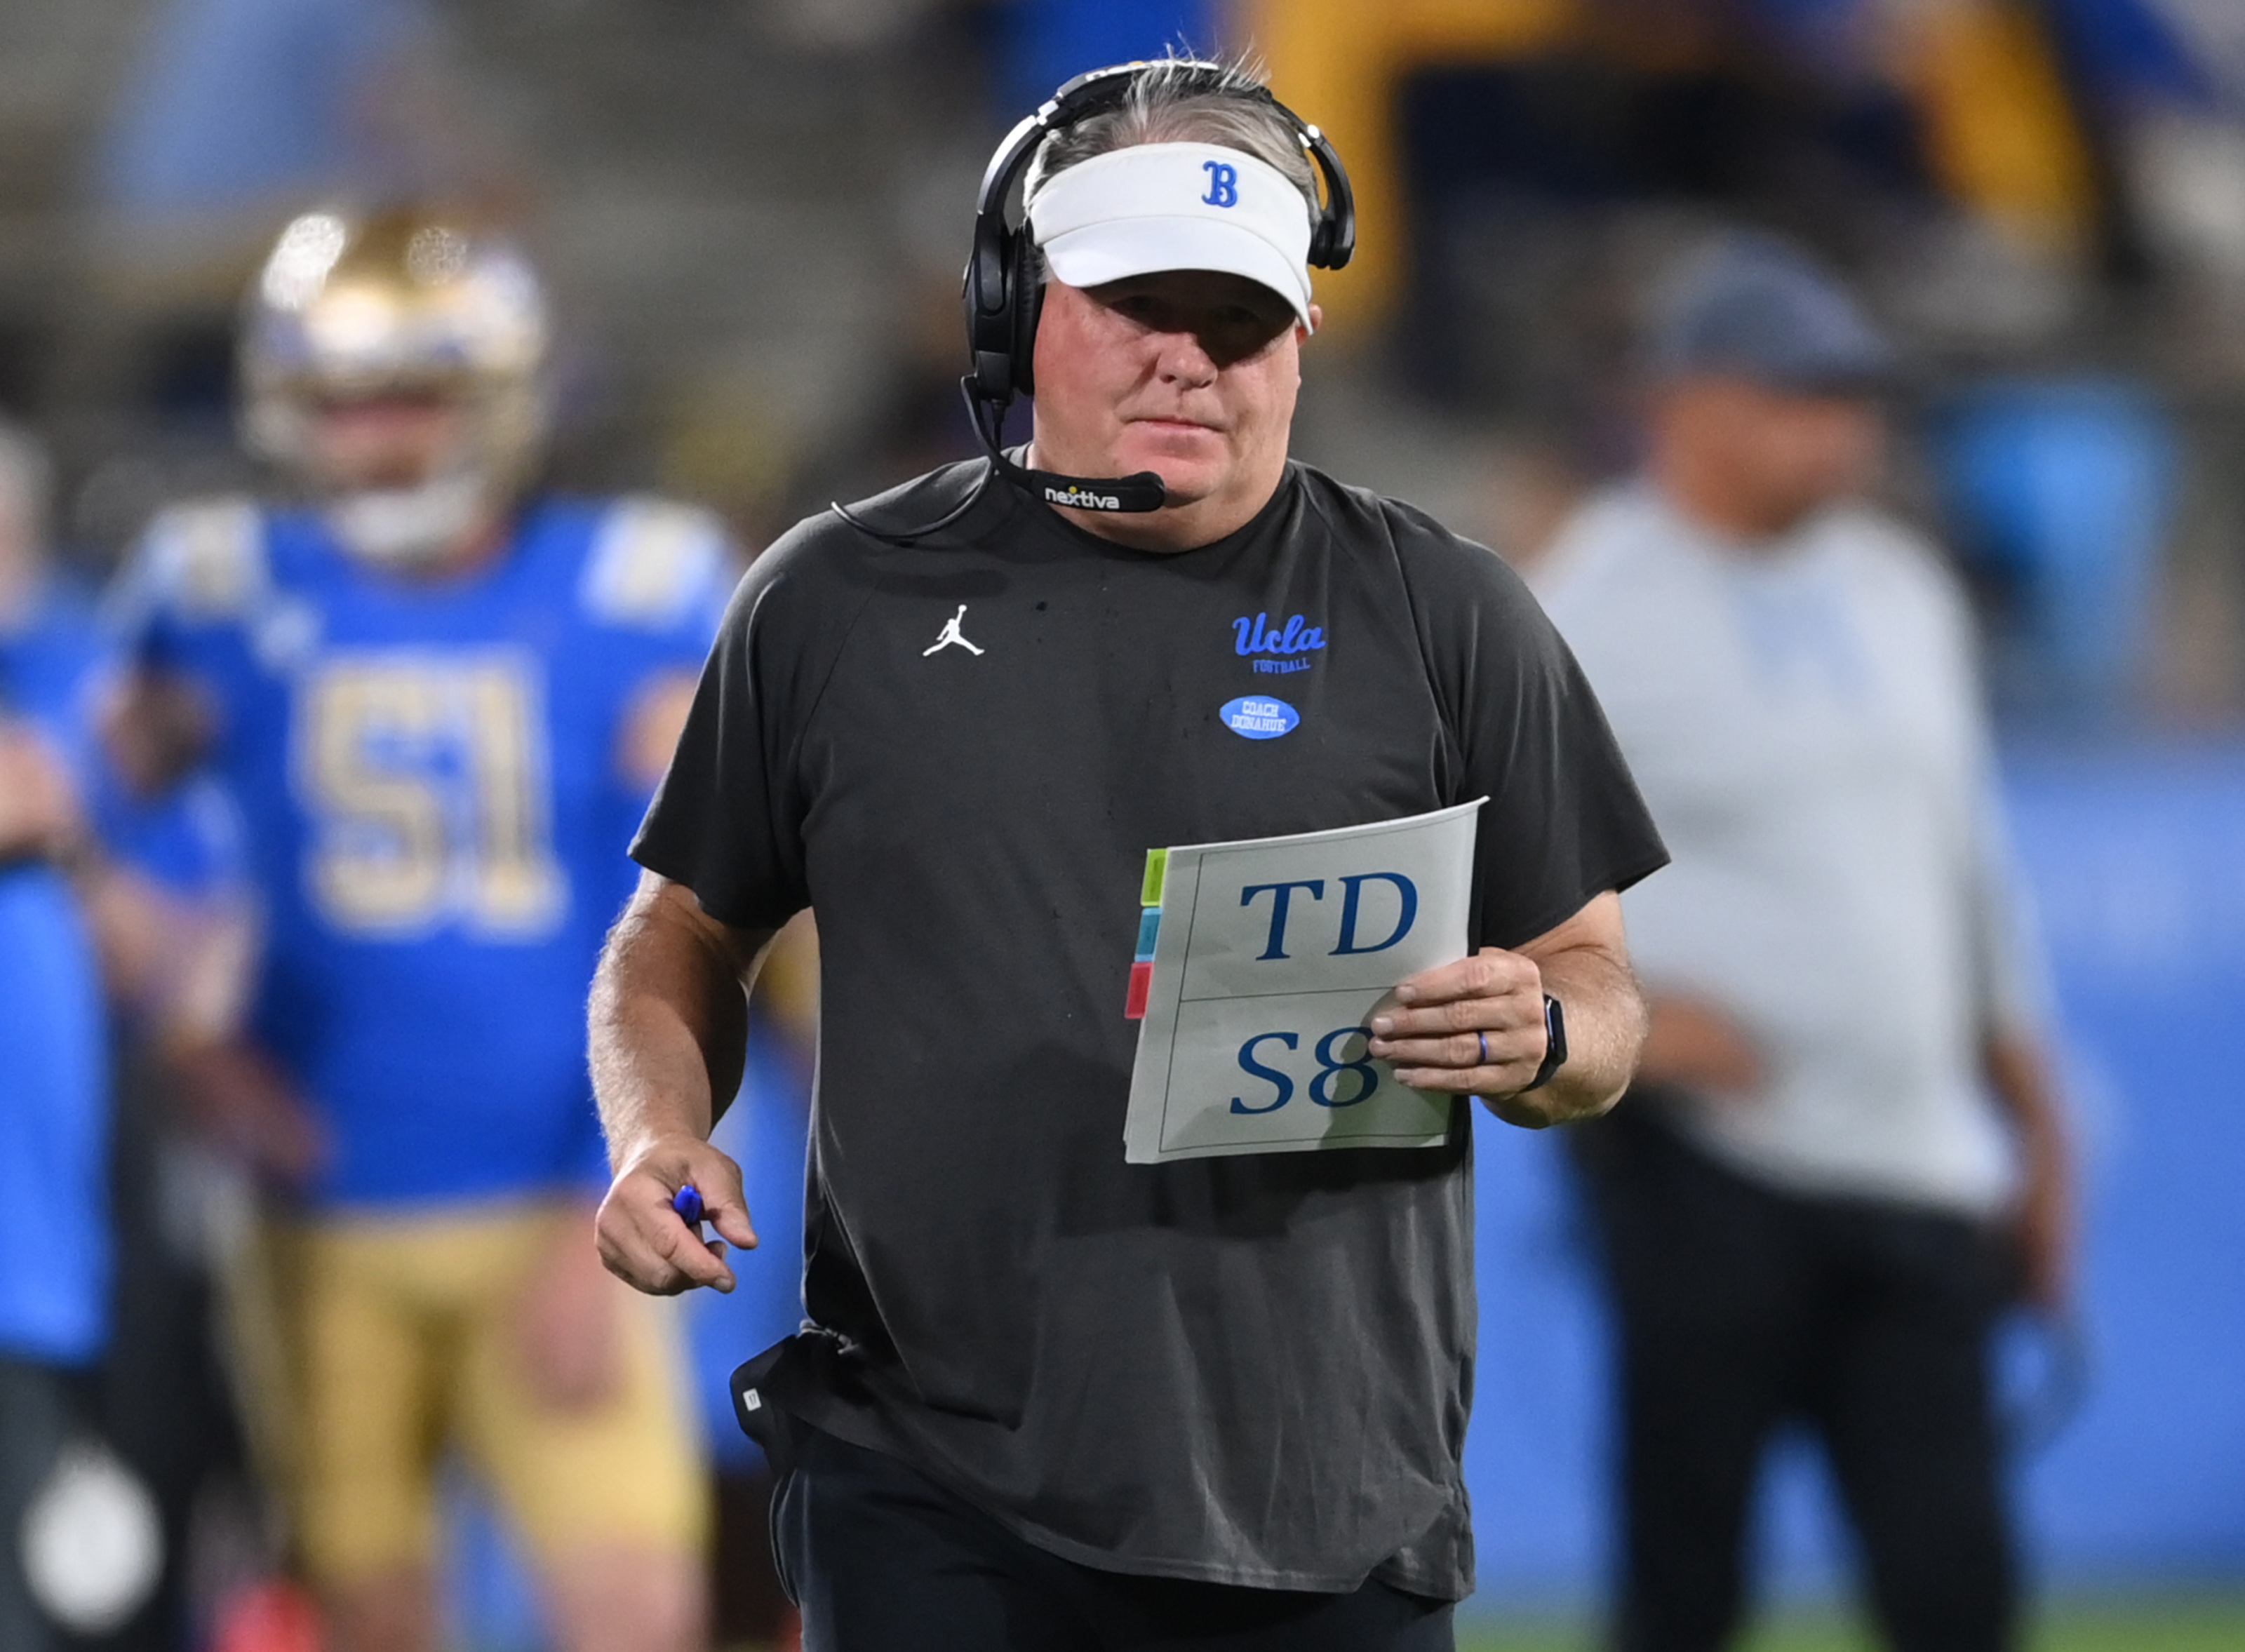 UCLA's Committed 2023 Prospects Move Up in Updated 247Sports Rankings